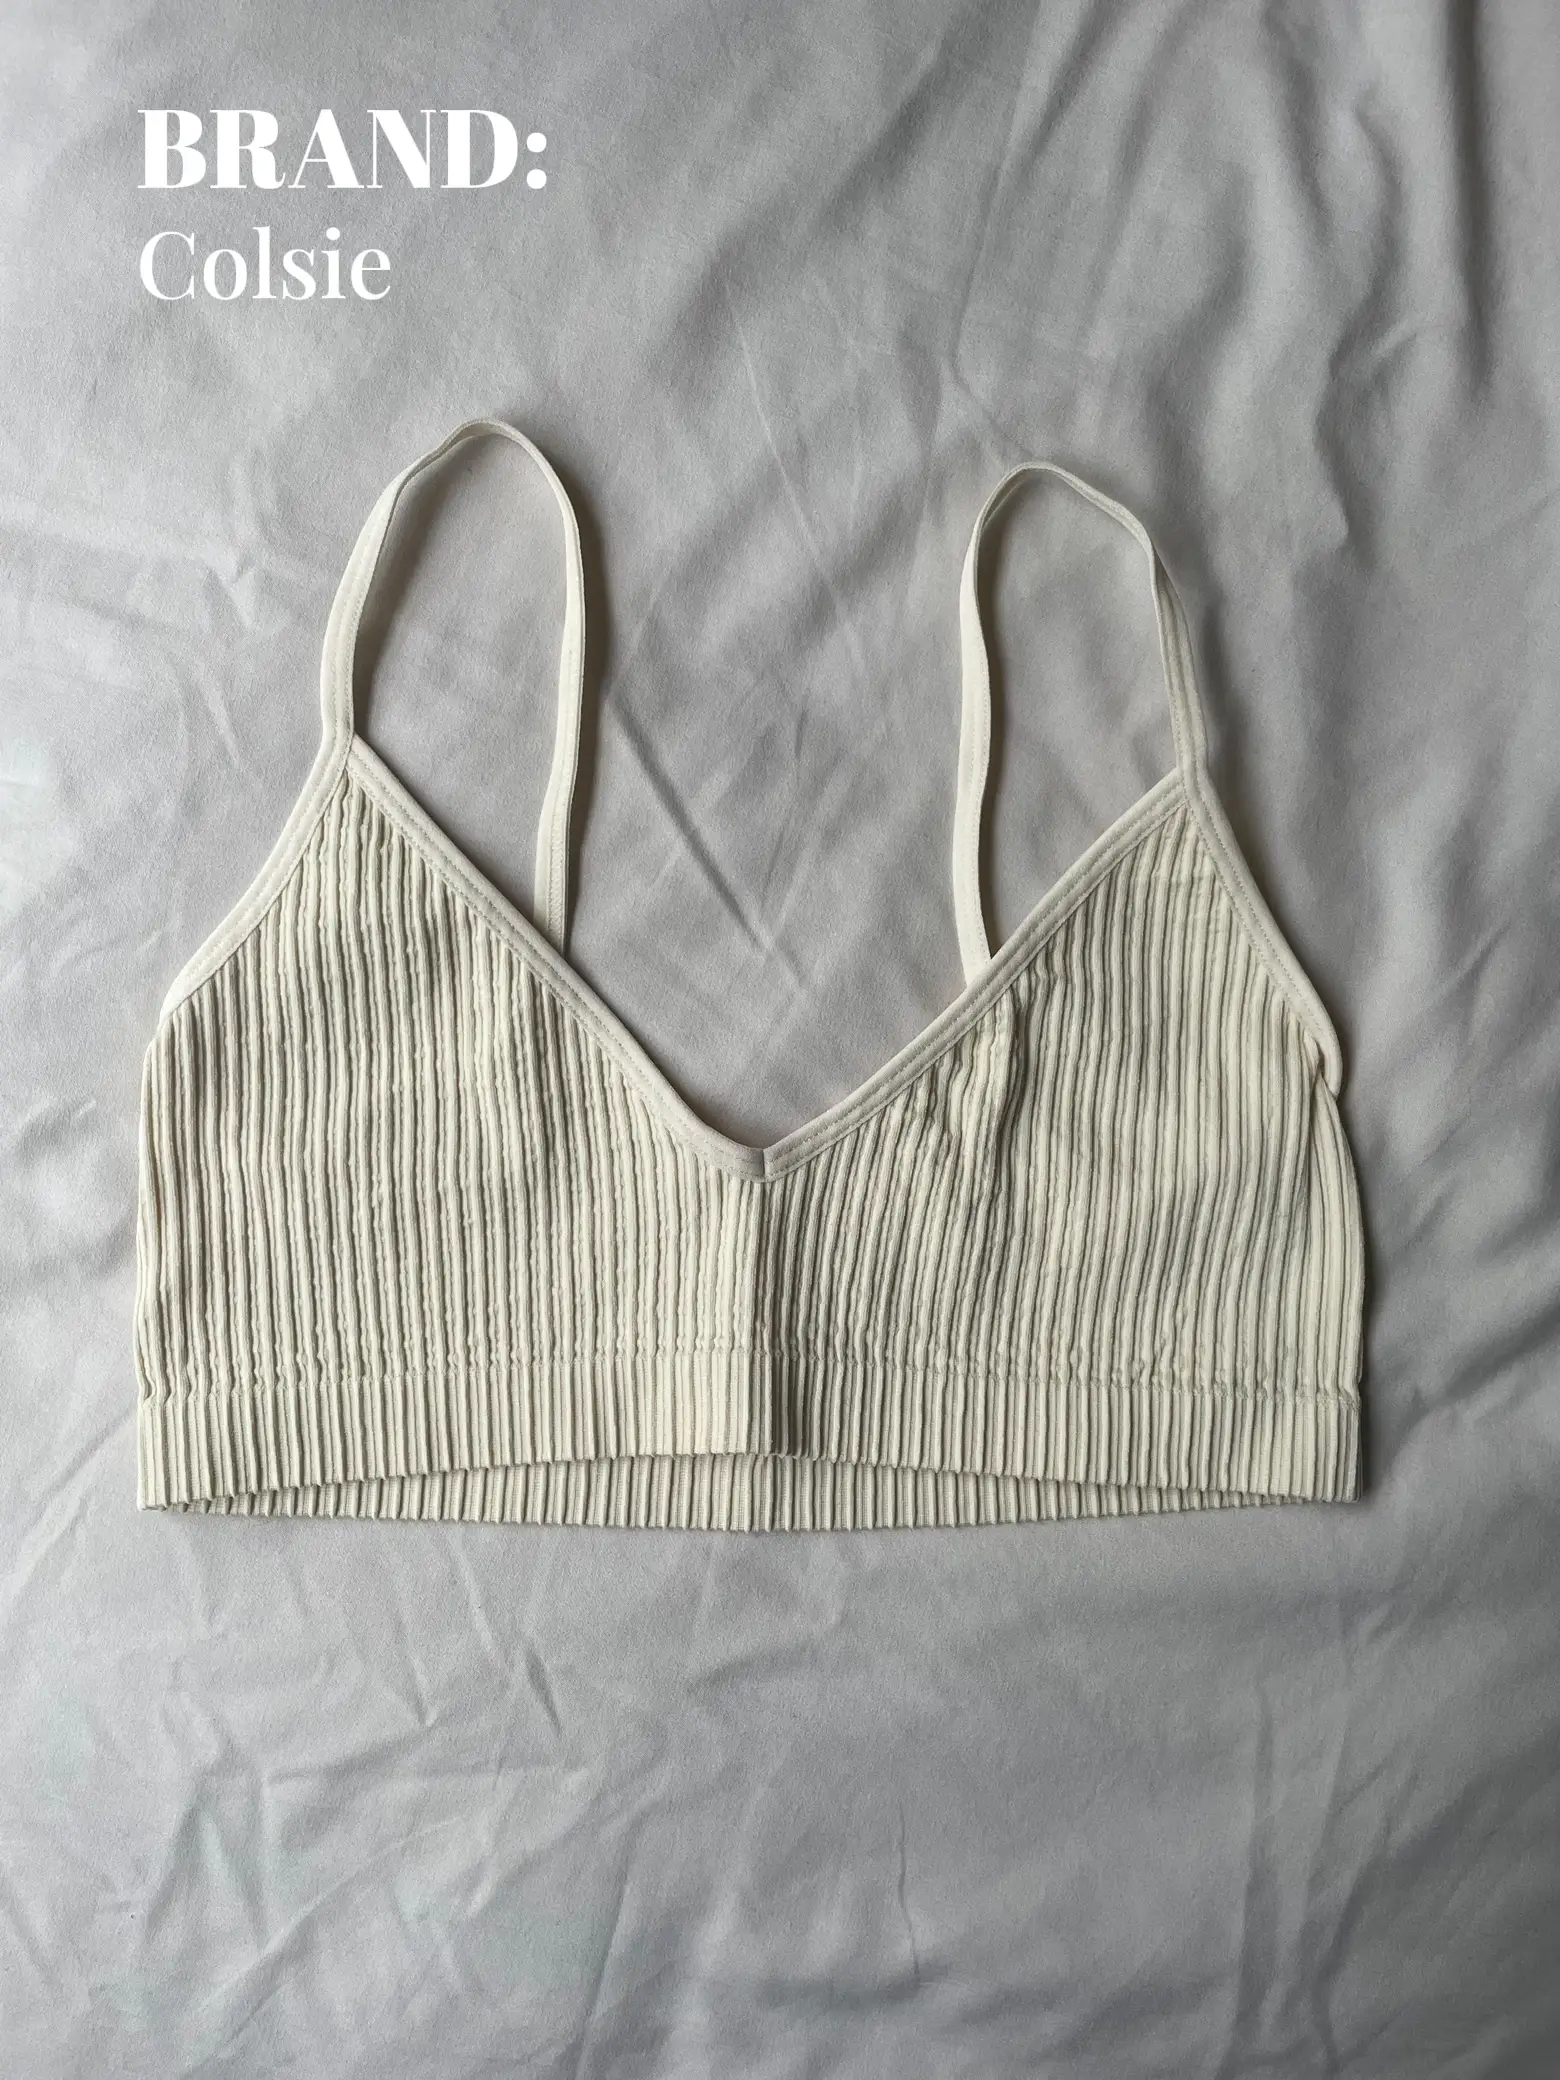 Stylish and Comfortable Colsie Bralette